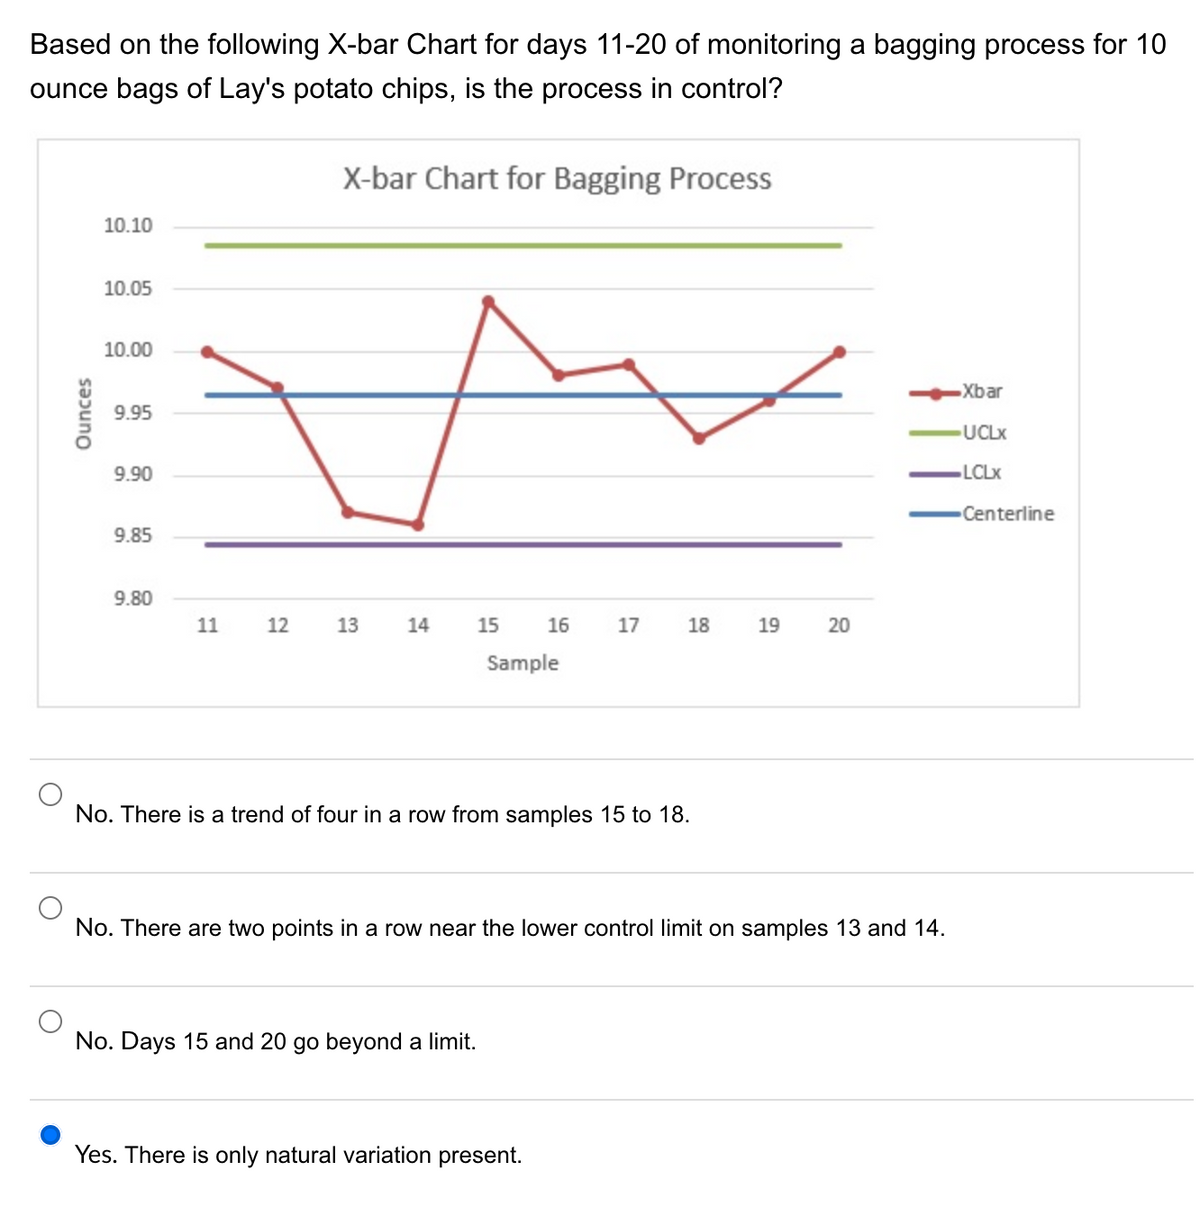 Based on the following X-bar Chart for days 11-20 of monitoring a bagging process for 10
ounce bags of Lay's potato chips, is the process in control?
Ounces
10.10
10.05
10.00
9.95
9.90
9.85
9.80
11
12
X-bar Chart for Bagging Process
13
14
15
No. Days 15 and 20 go beyond a limit.
16
Sample
17
No. There is a trend of four in a row from samples 15 to 18.
Yes. There is only natural variation present.
18
19
No. There are two points in a row near the lower control limit on samples 13 and 14.
20
Xbar
UCLX
-LCLx
Centerline